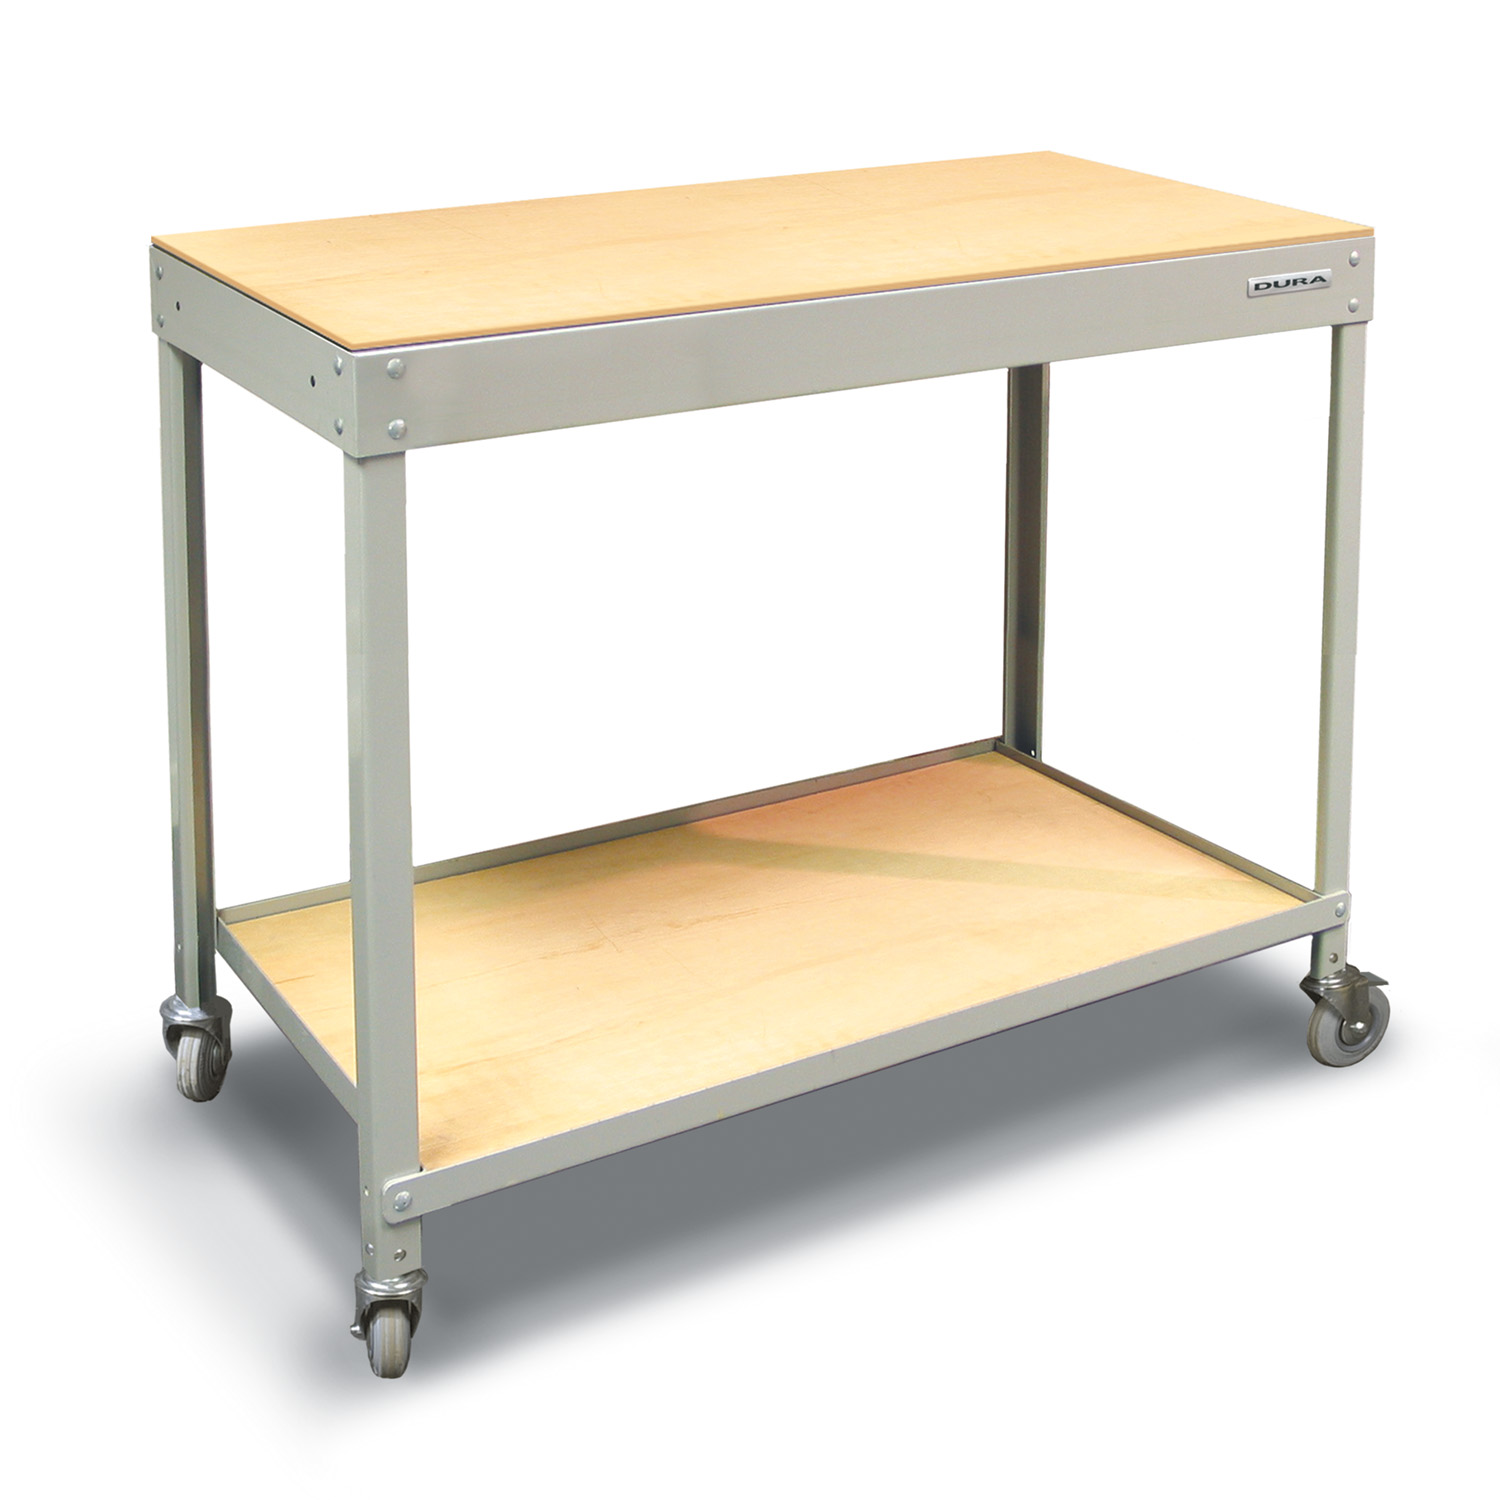 Workbench with castors (950mm high)